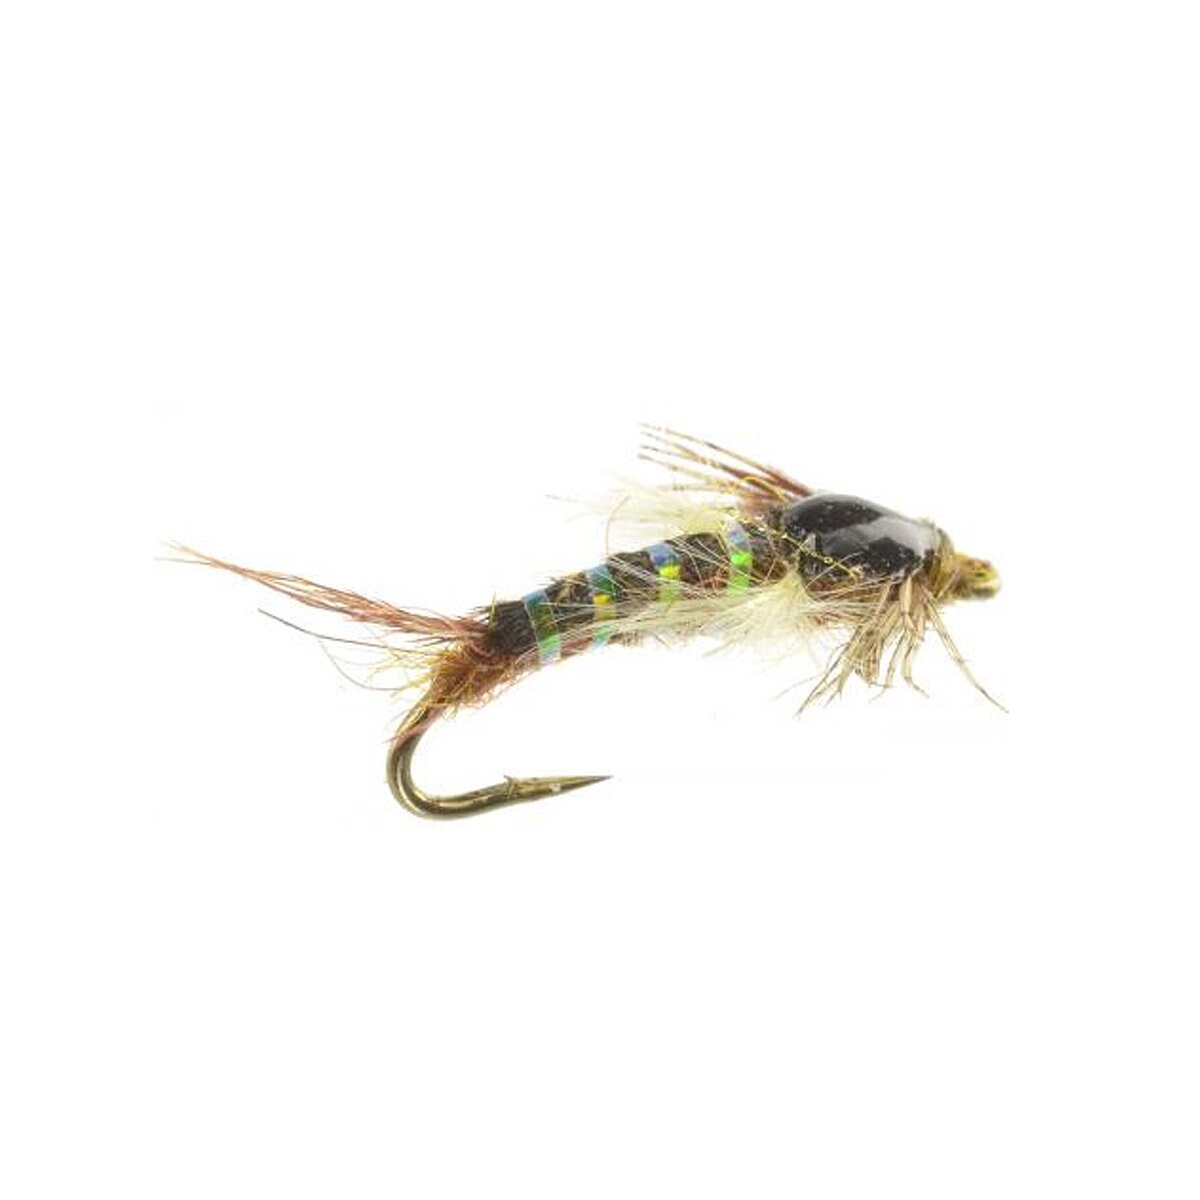 15 Wet Trout Grayling Fly fishing Fly Sale Popular Patterns by Dragonflies 